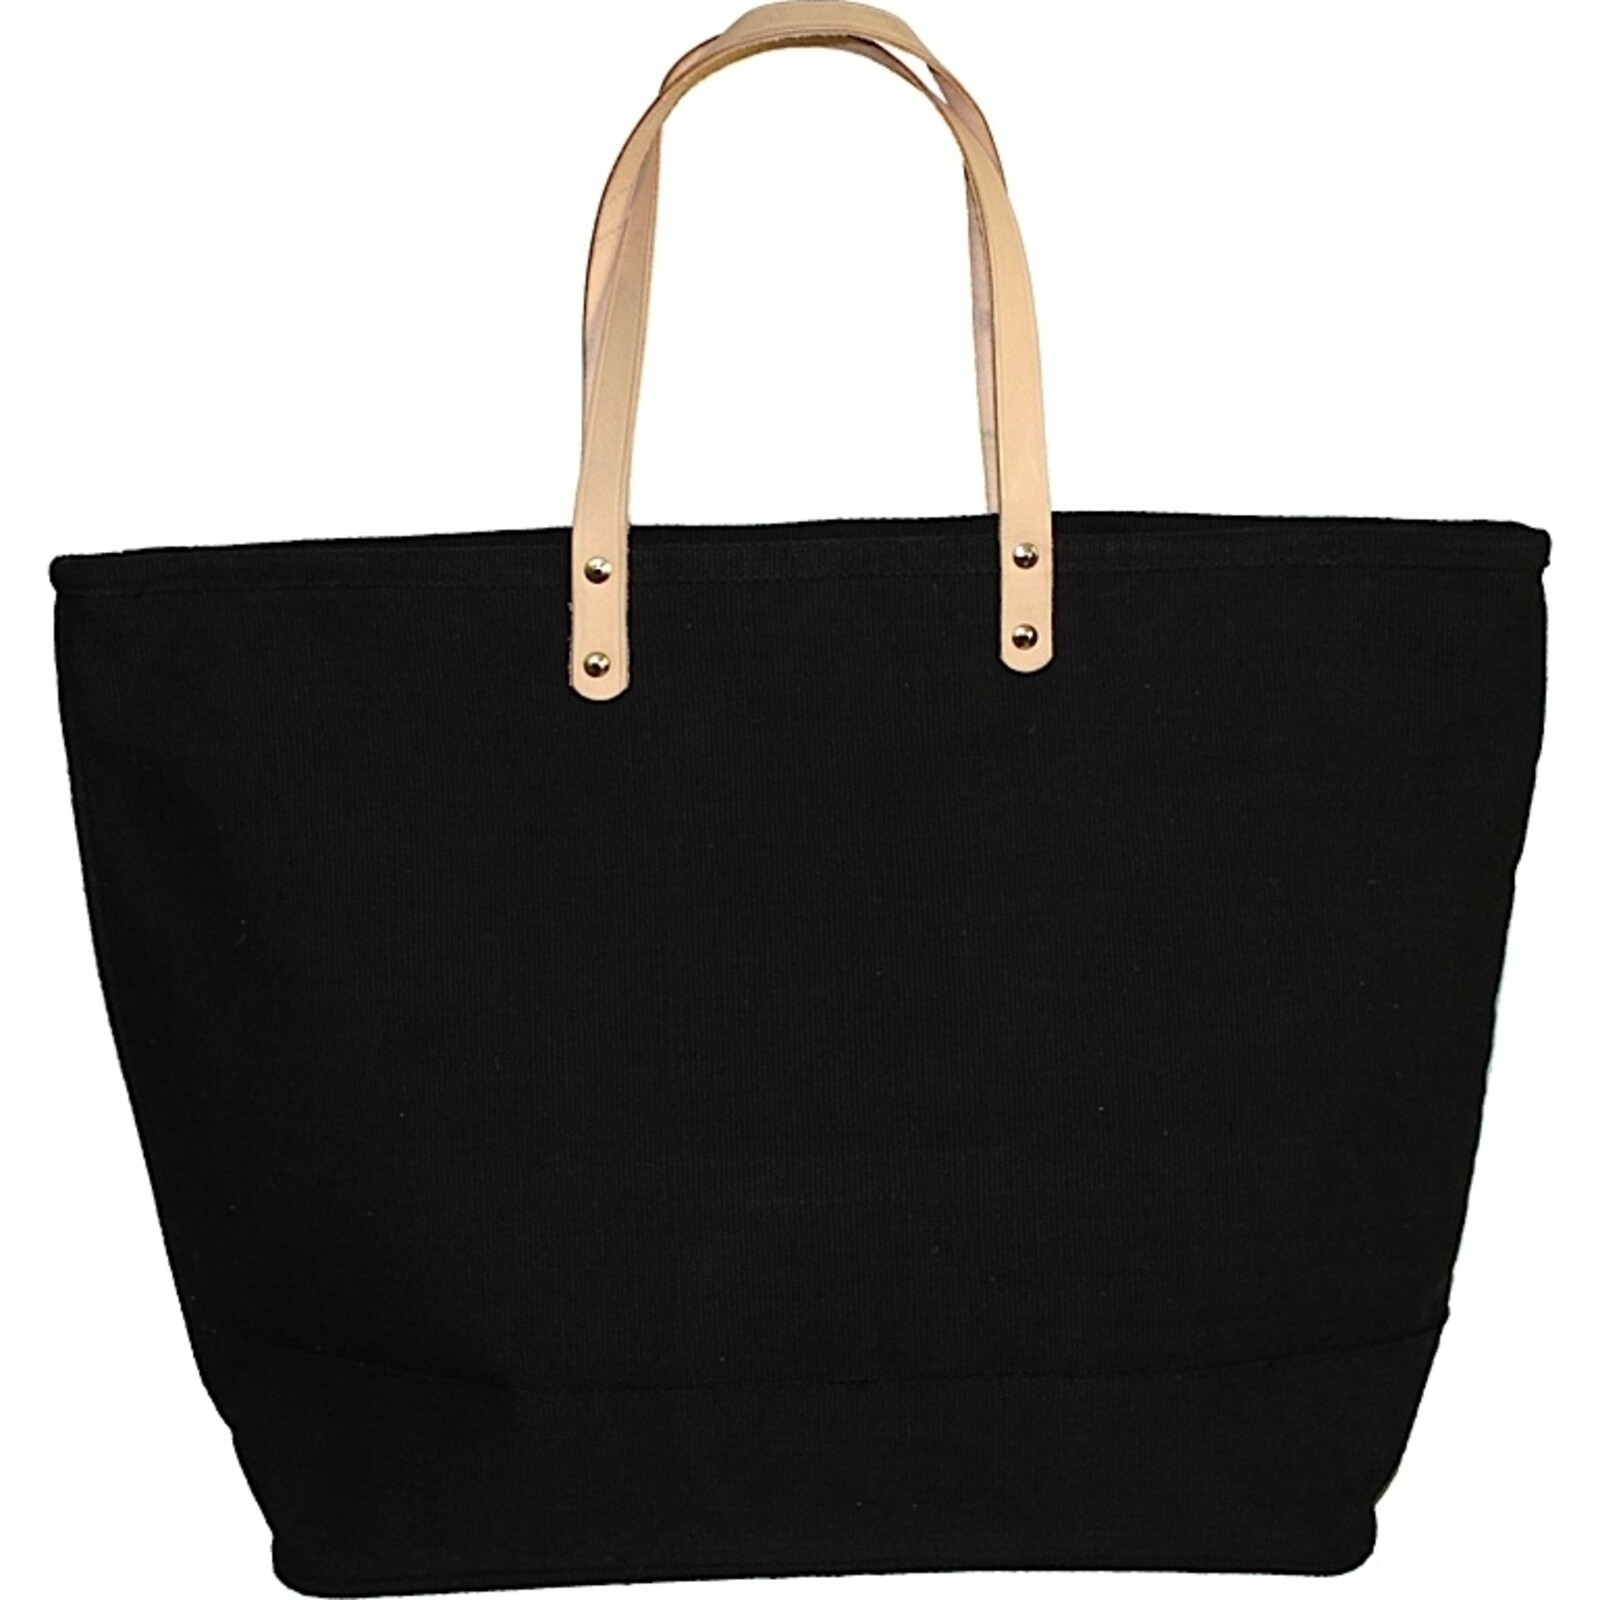 Black Bag with Leather Handles